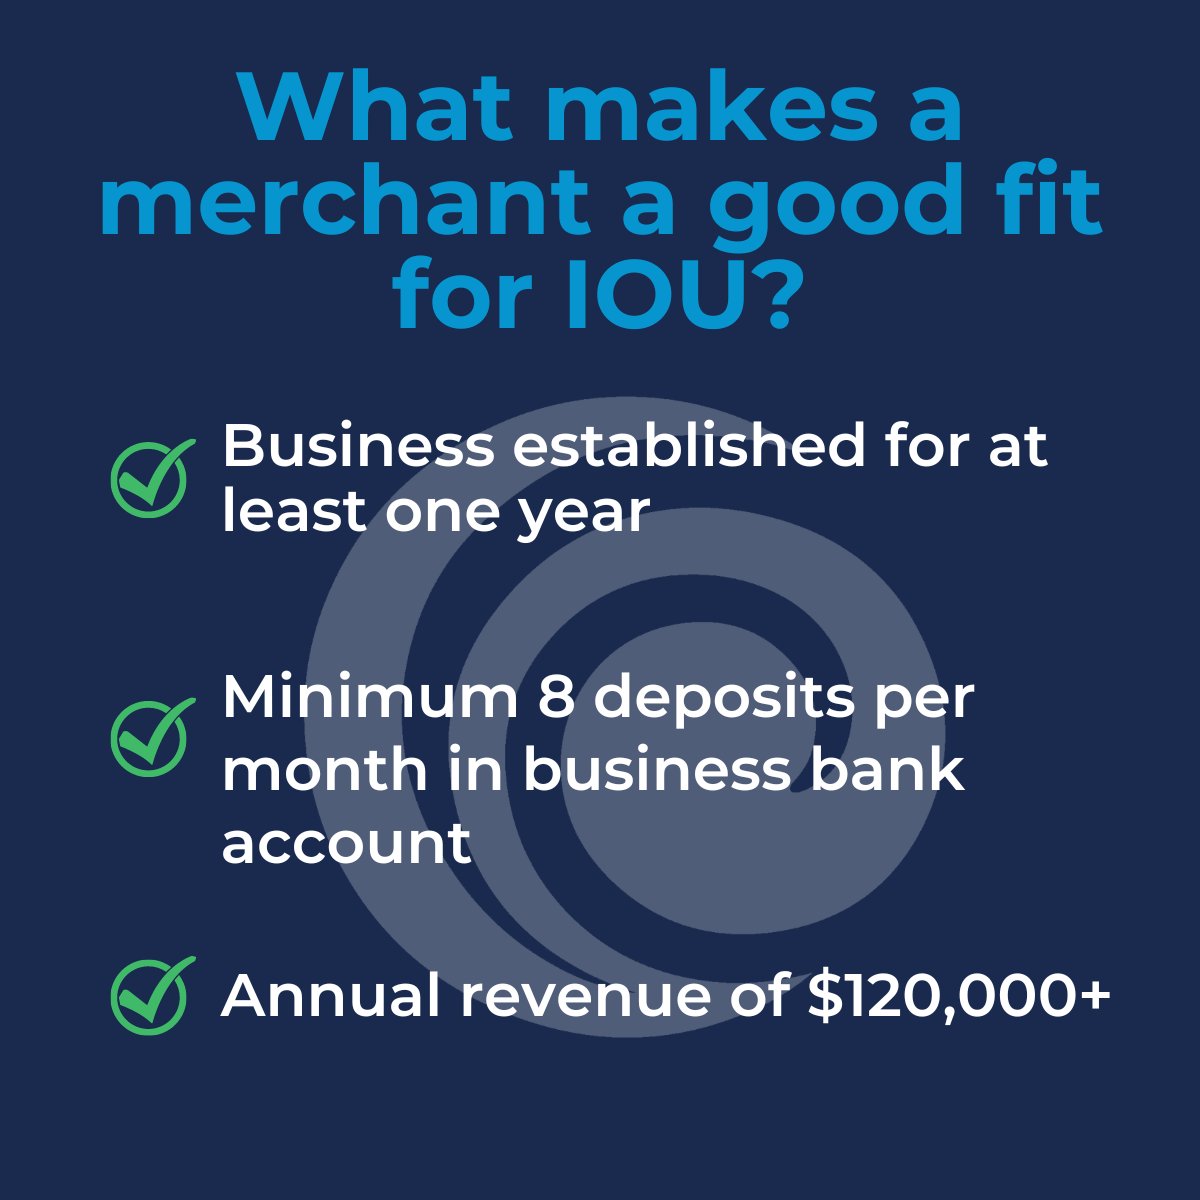 Curious if your merchant is a good fit for a loan with IOU Financial? Make sure they meet our minimum requirements and then submit here: partners.ioufinancial.com

#SmallBusinessLoan #BusinessFinancing #WorkingCapital #BusinessFunding